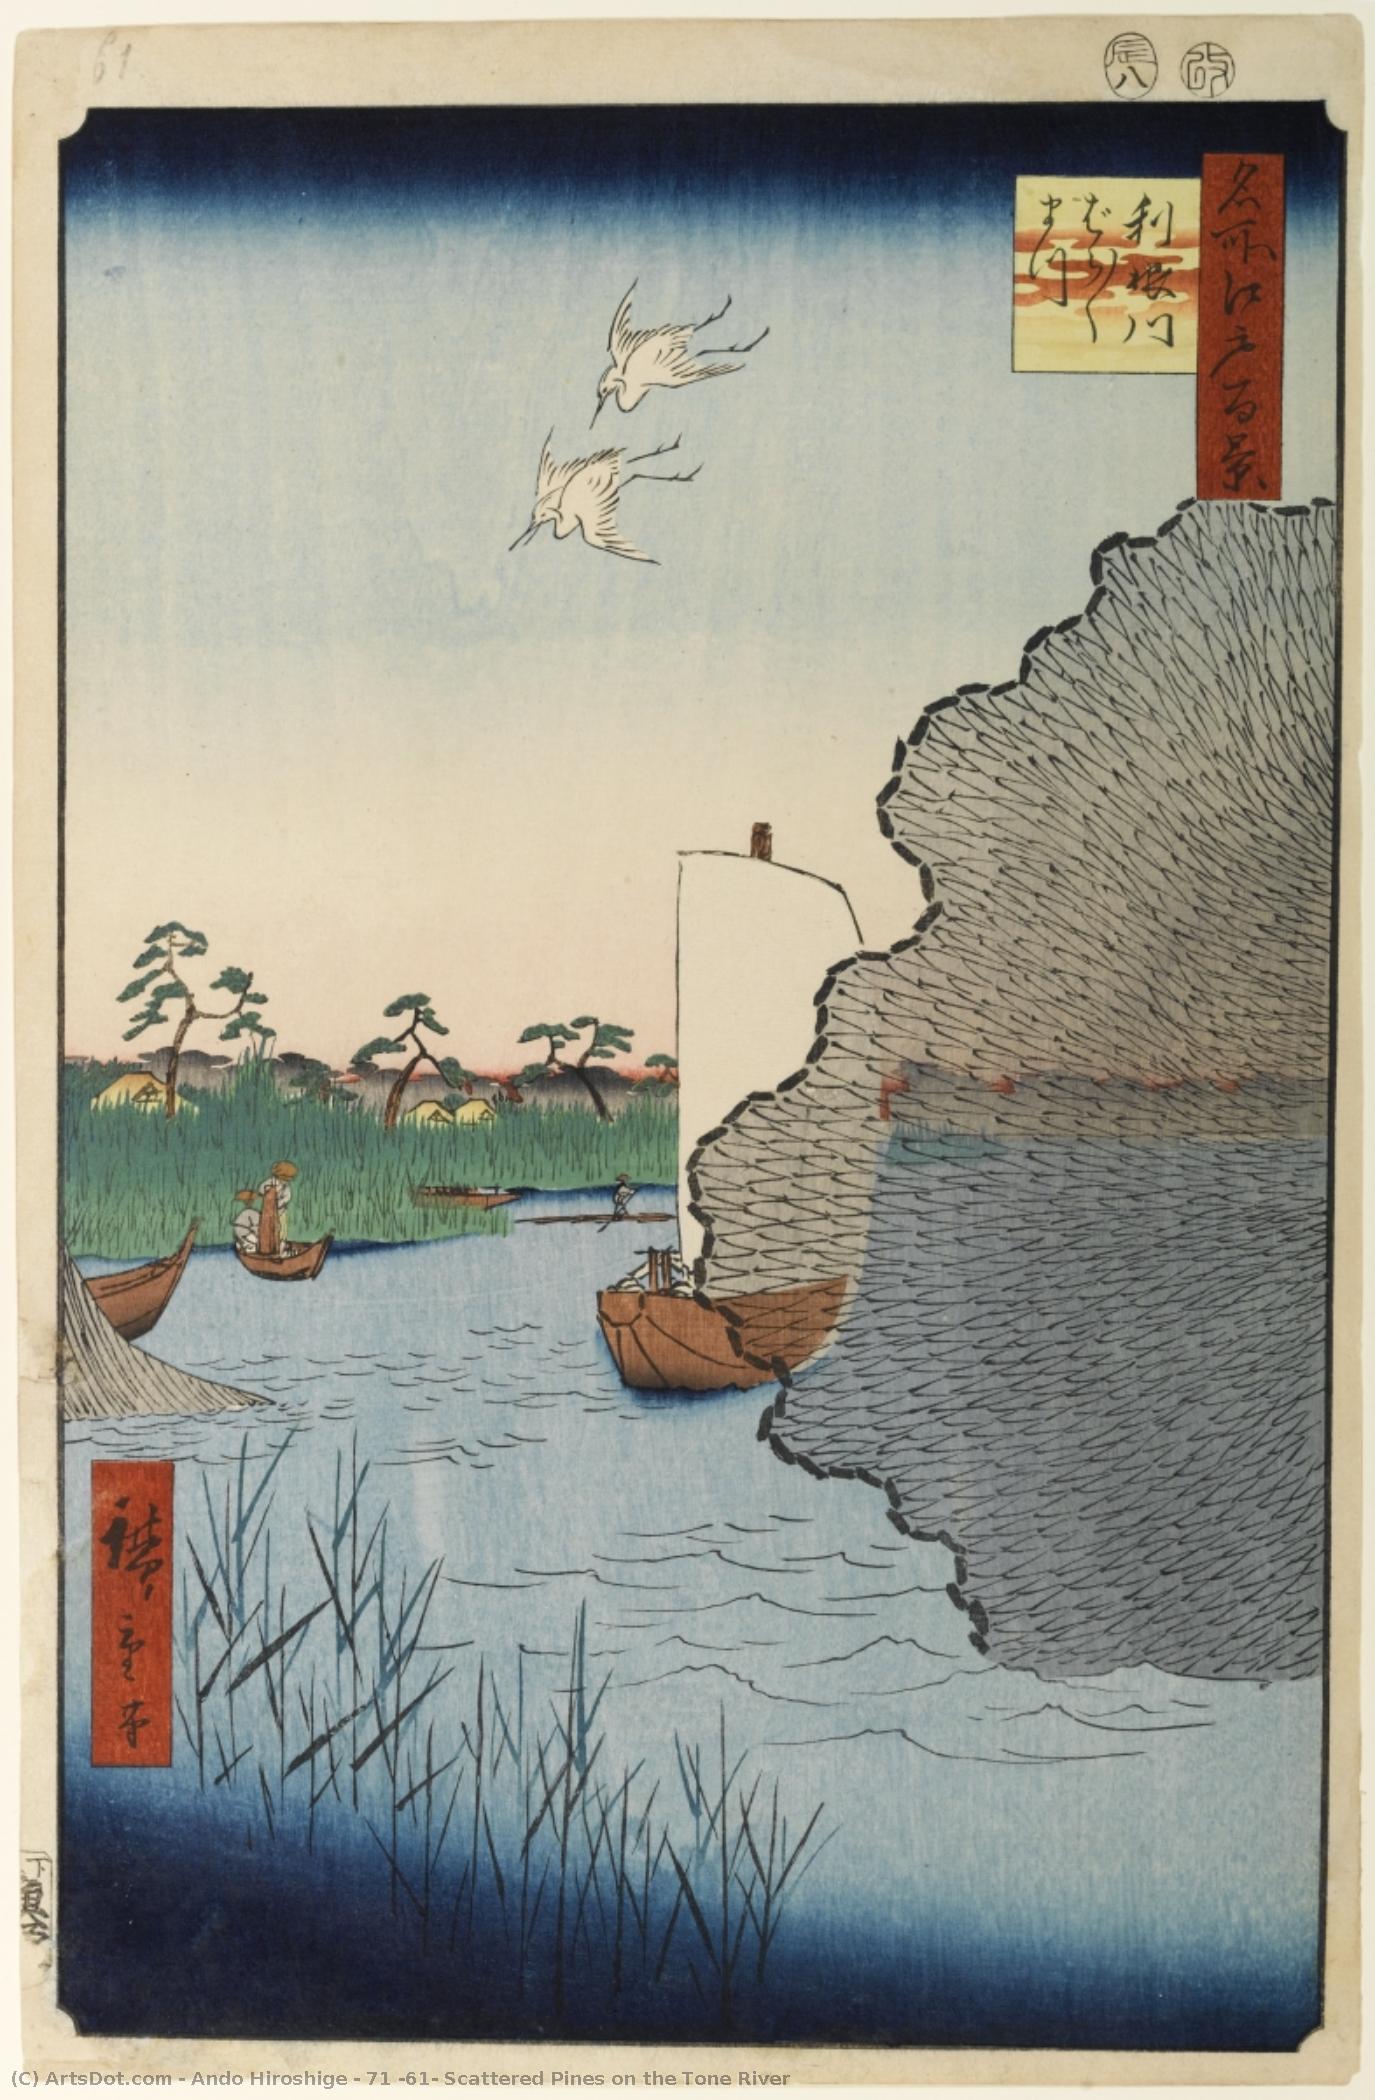  Oil Painting Replica 71 (61) Scattered Pines on the Tone River by Ando Hiroshige (1797-1858, Japan) | ArtsDot.com